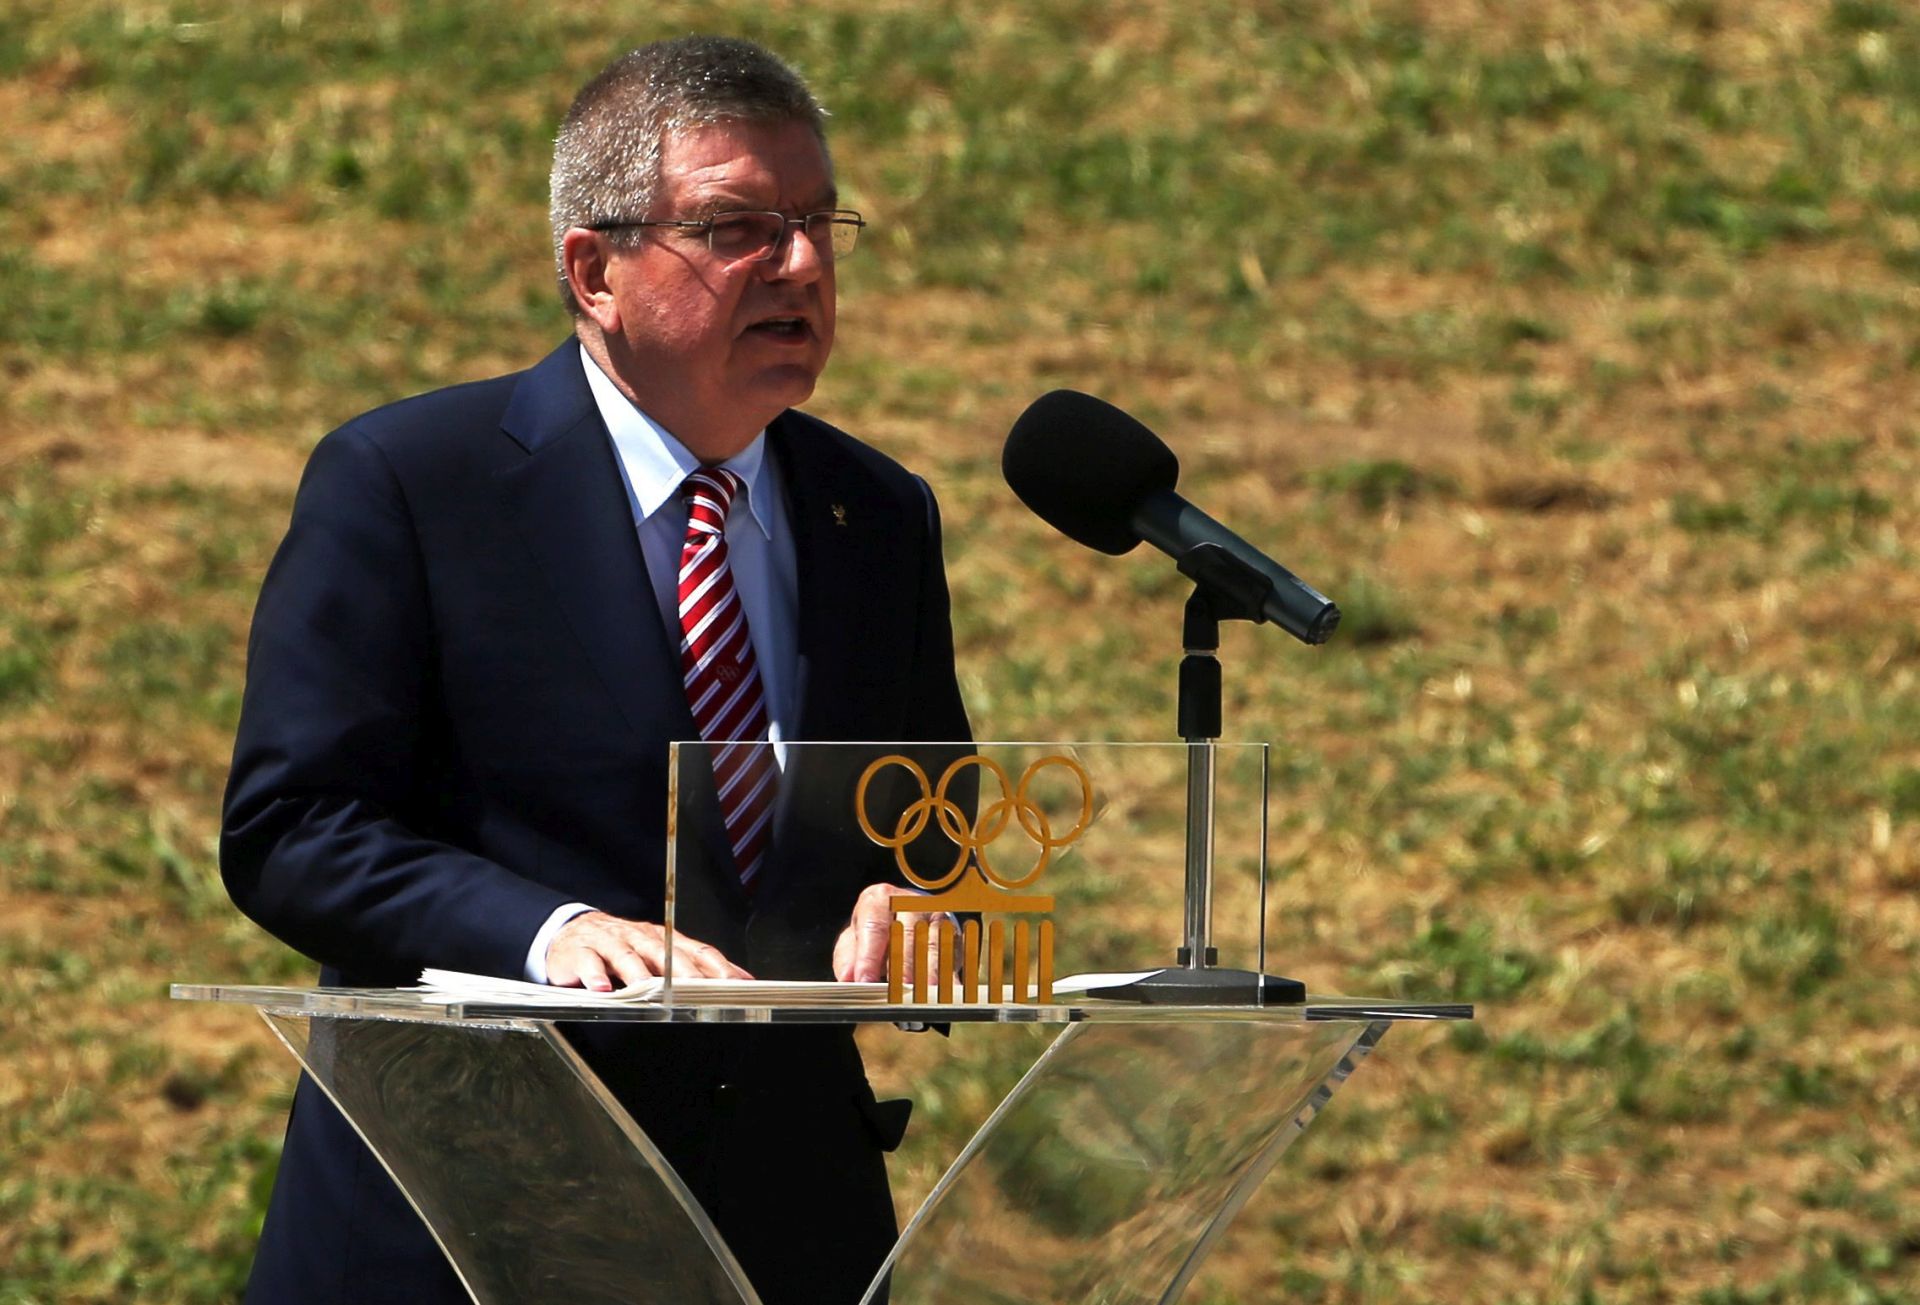 epa05270340 President of the IOC Thomas Bach delivers his speech, during the Lighting Ceremony of the Rio 2016 Olympic Games at the site of ancient Olympia in Greece, 21 April 2016. The Summer Olympic Games will be held in Rio de Janeiro, Brazil from 03 August to 21 August 2016.  EPA/ALEXANDROS VLACHOS